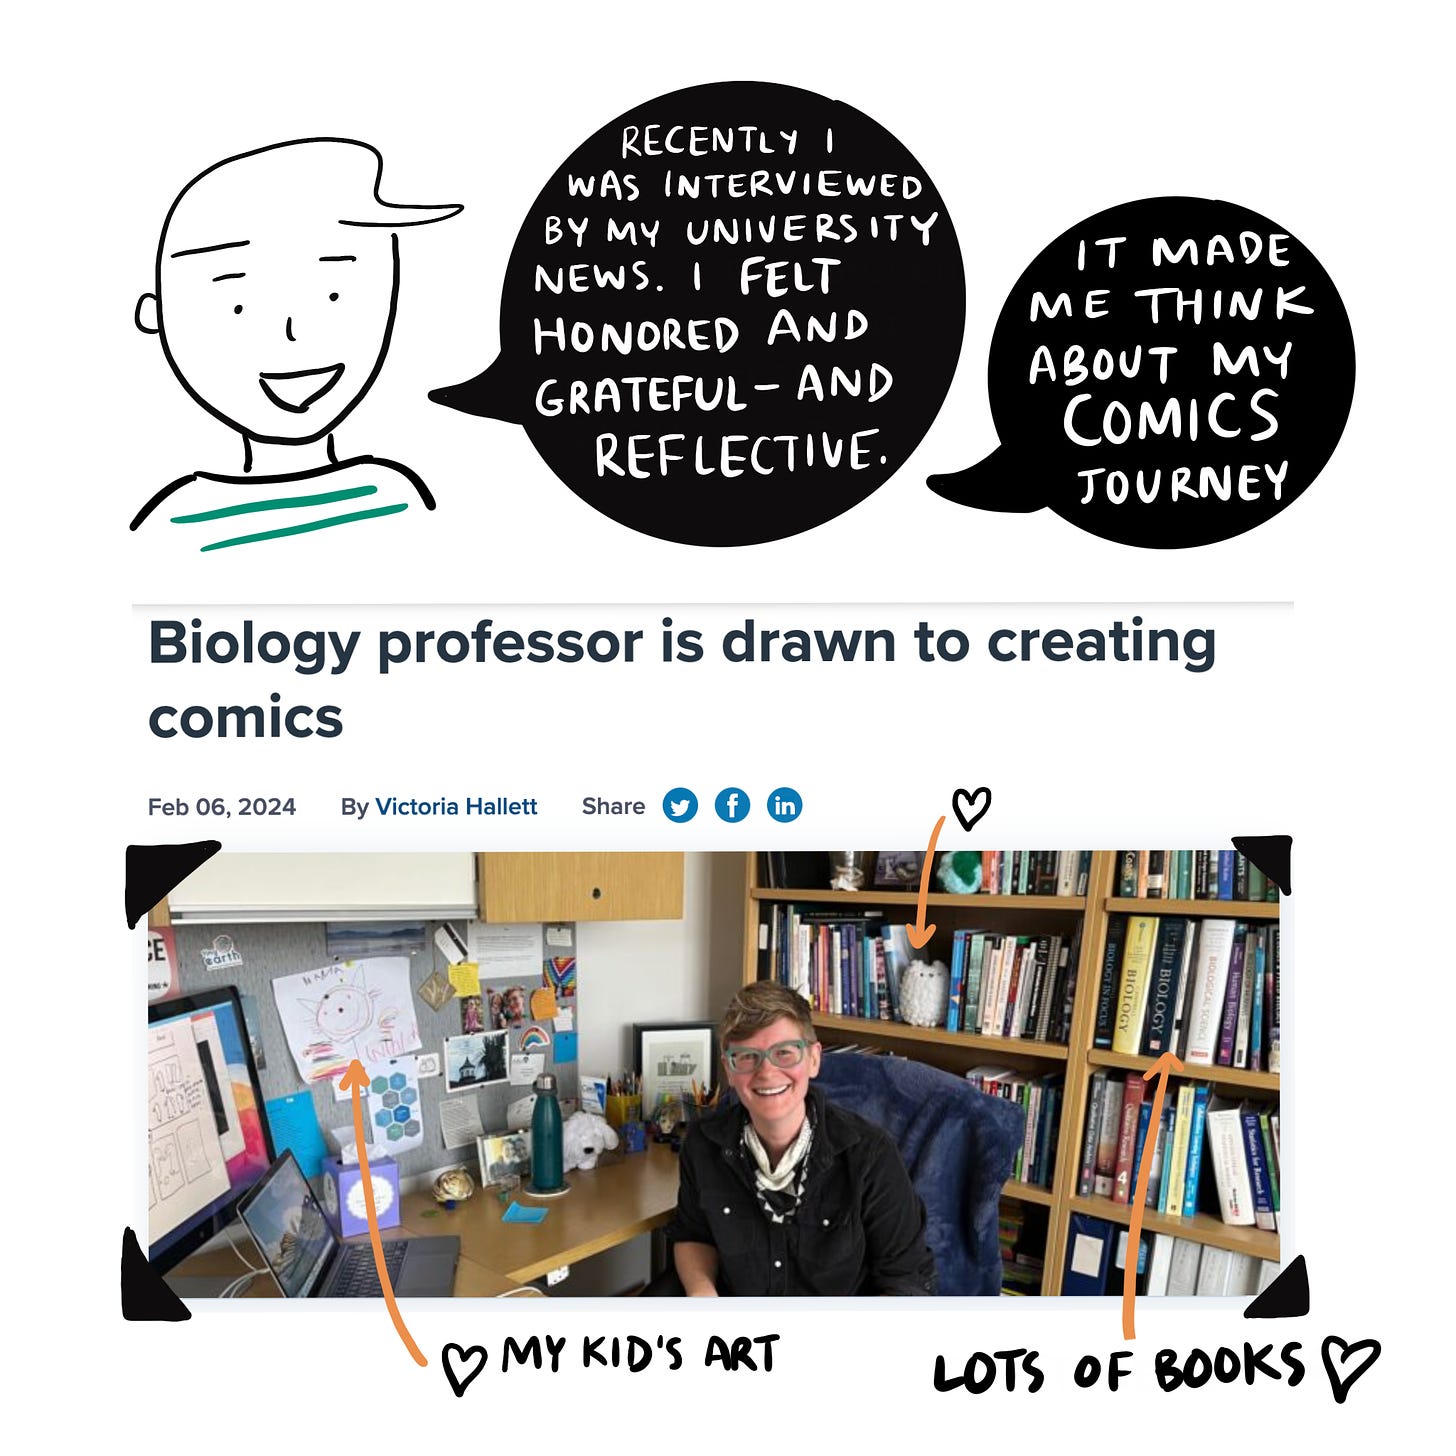 Cartoonist saying: Recently I was interviewed by my university news. I felt honored and grateful—and reflective. It made me think about my comics journey. Picture of a news interview that is entitled “Biology professor is drawn to creating comics.” White nonbinary human pictured sitting at their desk in front of bookcases. Arrows with hearts pointing to a squishy cat, cartoonist’s kid’s art, and lots of books.